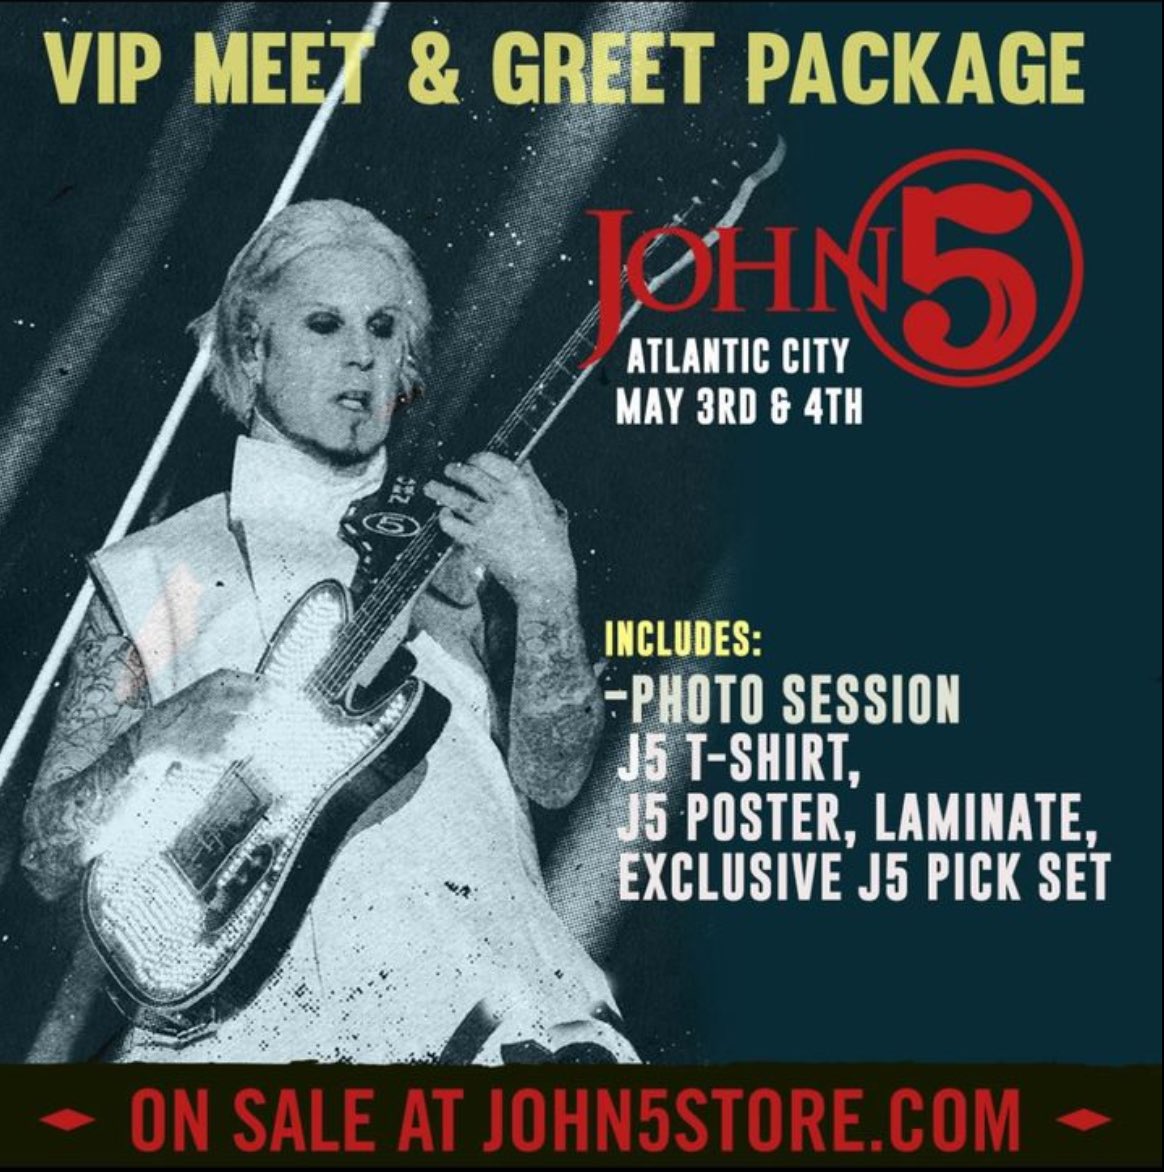 See you soon Crueheads! Come meet me! Upgrade your experience with a VIP meet & greet package* for either of the Atlantic City shows May 3 & 4. More info: john5store.com/collections/vi… @MotleyCrue tour dates & tix: motley.com #John5 #MotleyCrue *M&G with John 5 only.